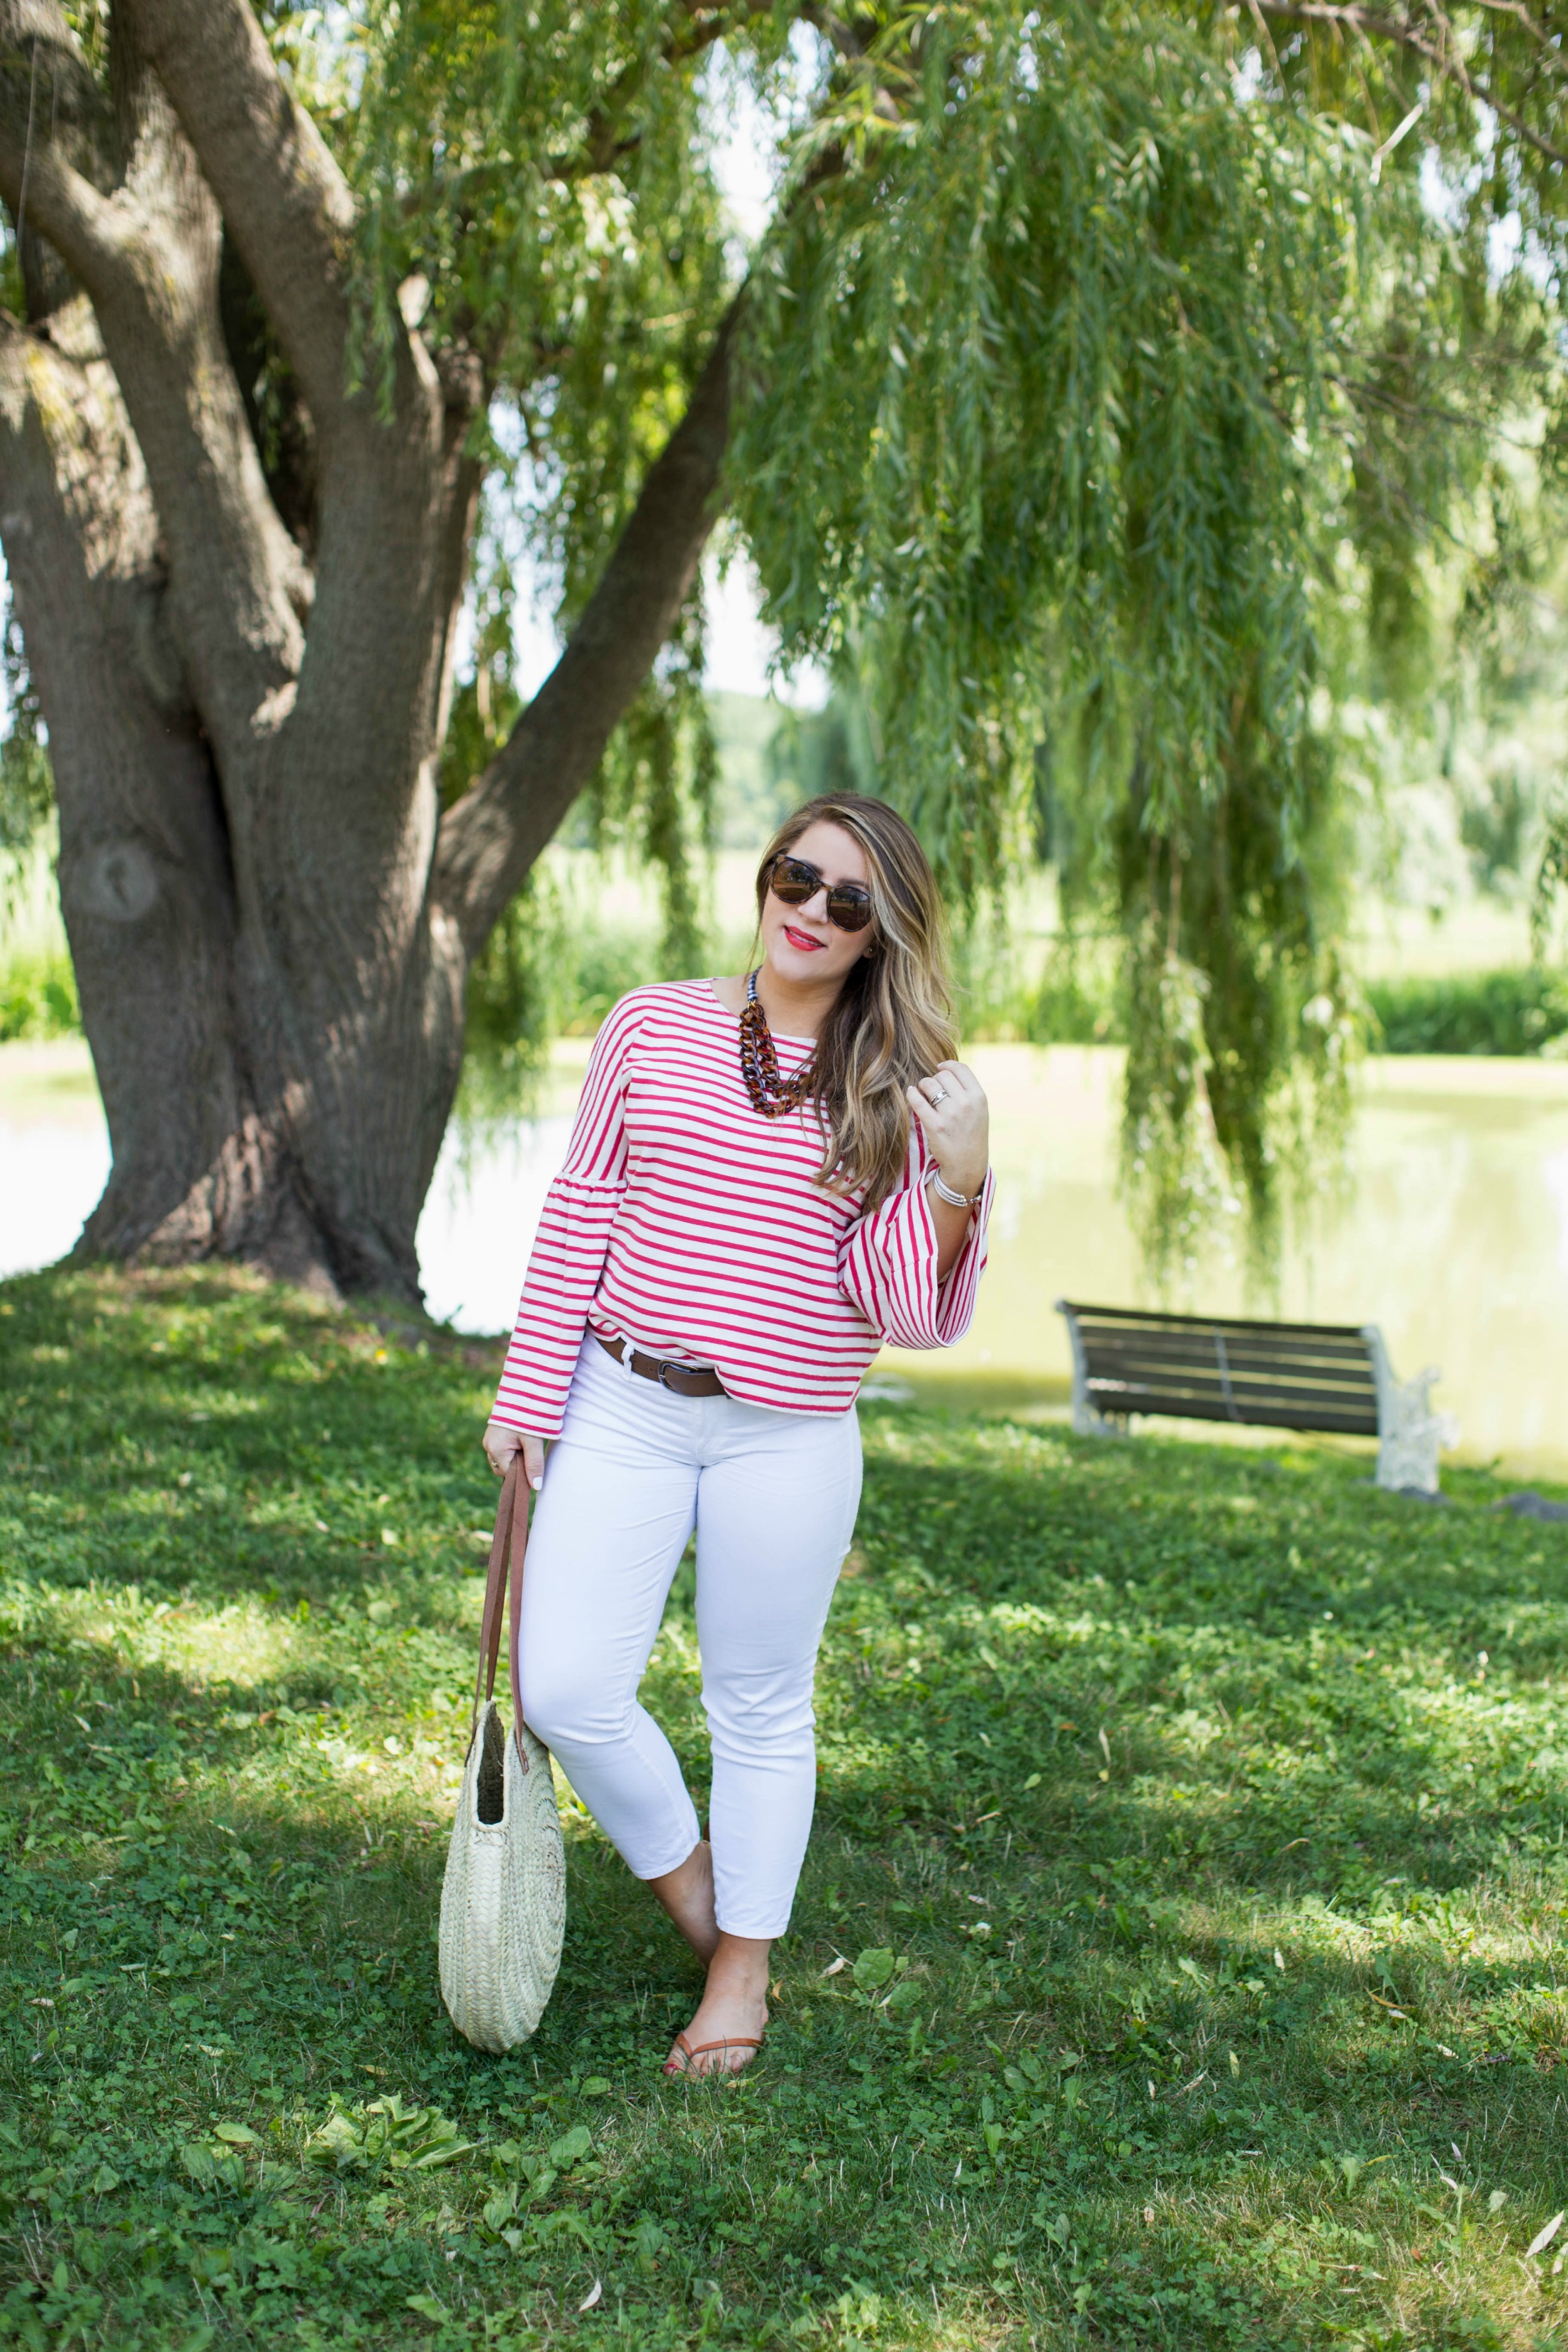 Vacation Outfits at MacKenzie-Childs by NC fashion blogger Coffee Beans and Bobby Pins